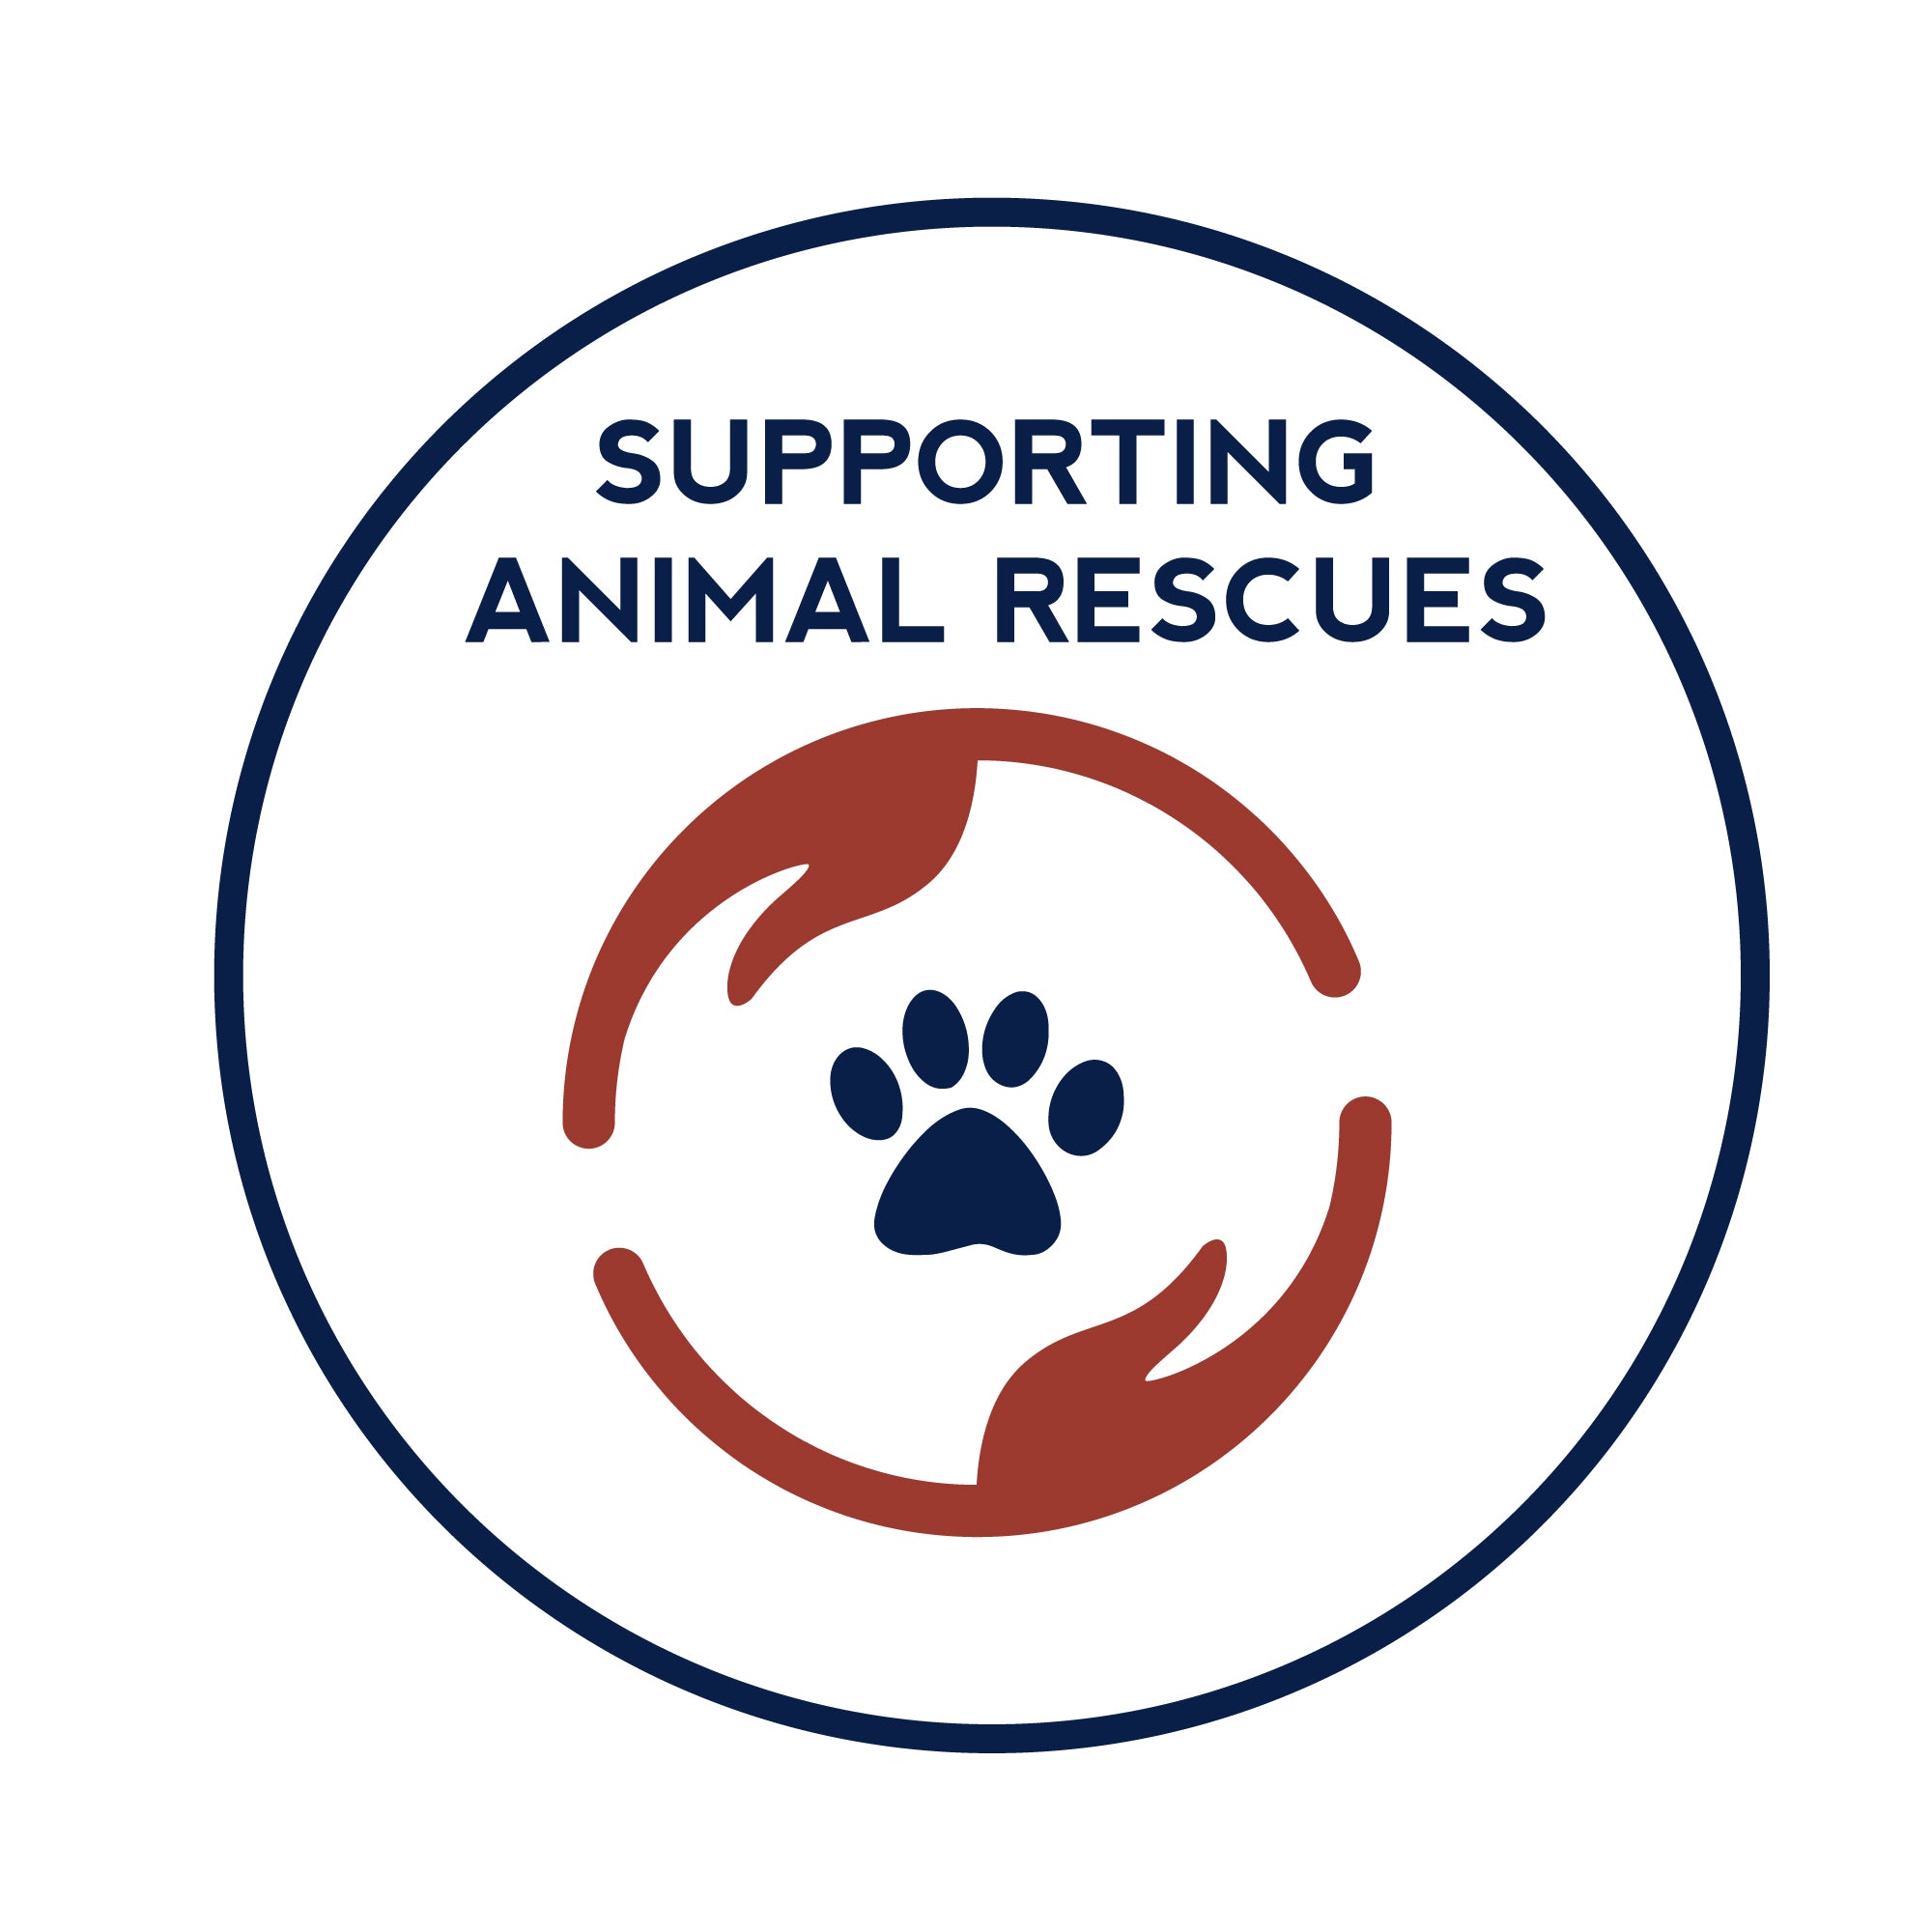 SUPPORTING-ANIMAL-RESCUES